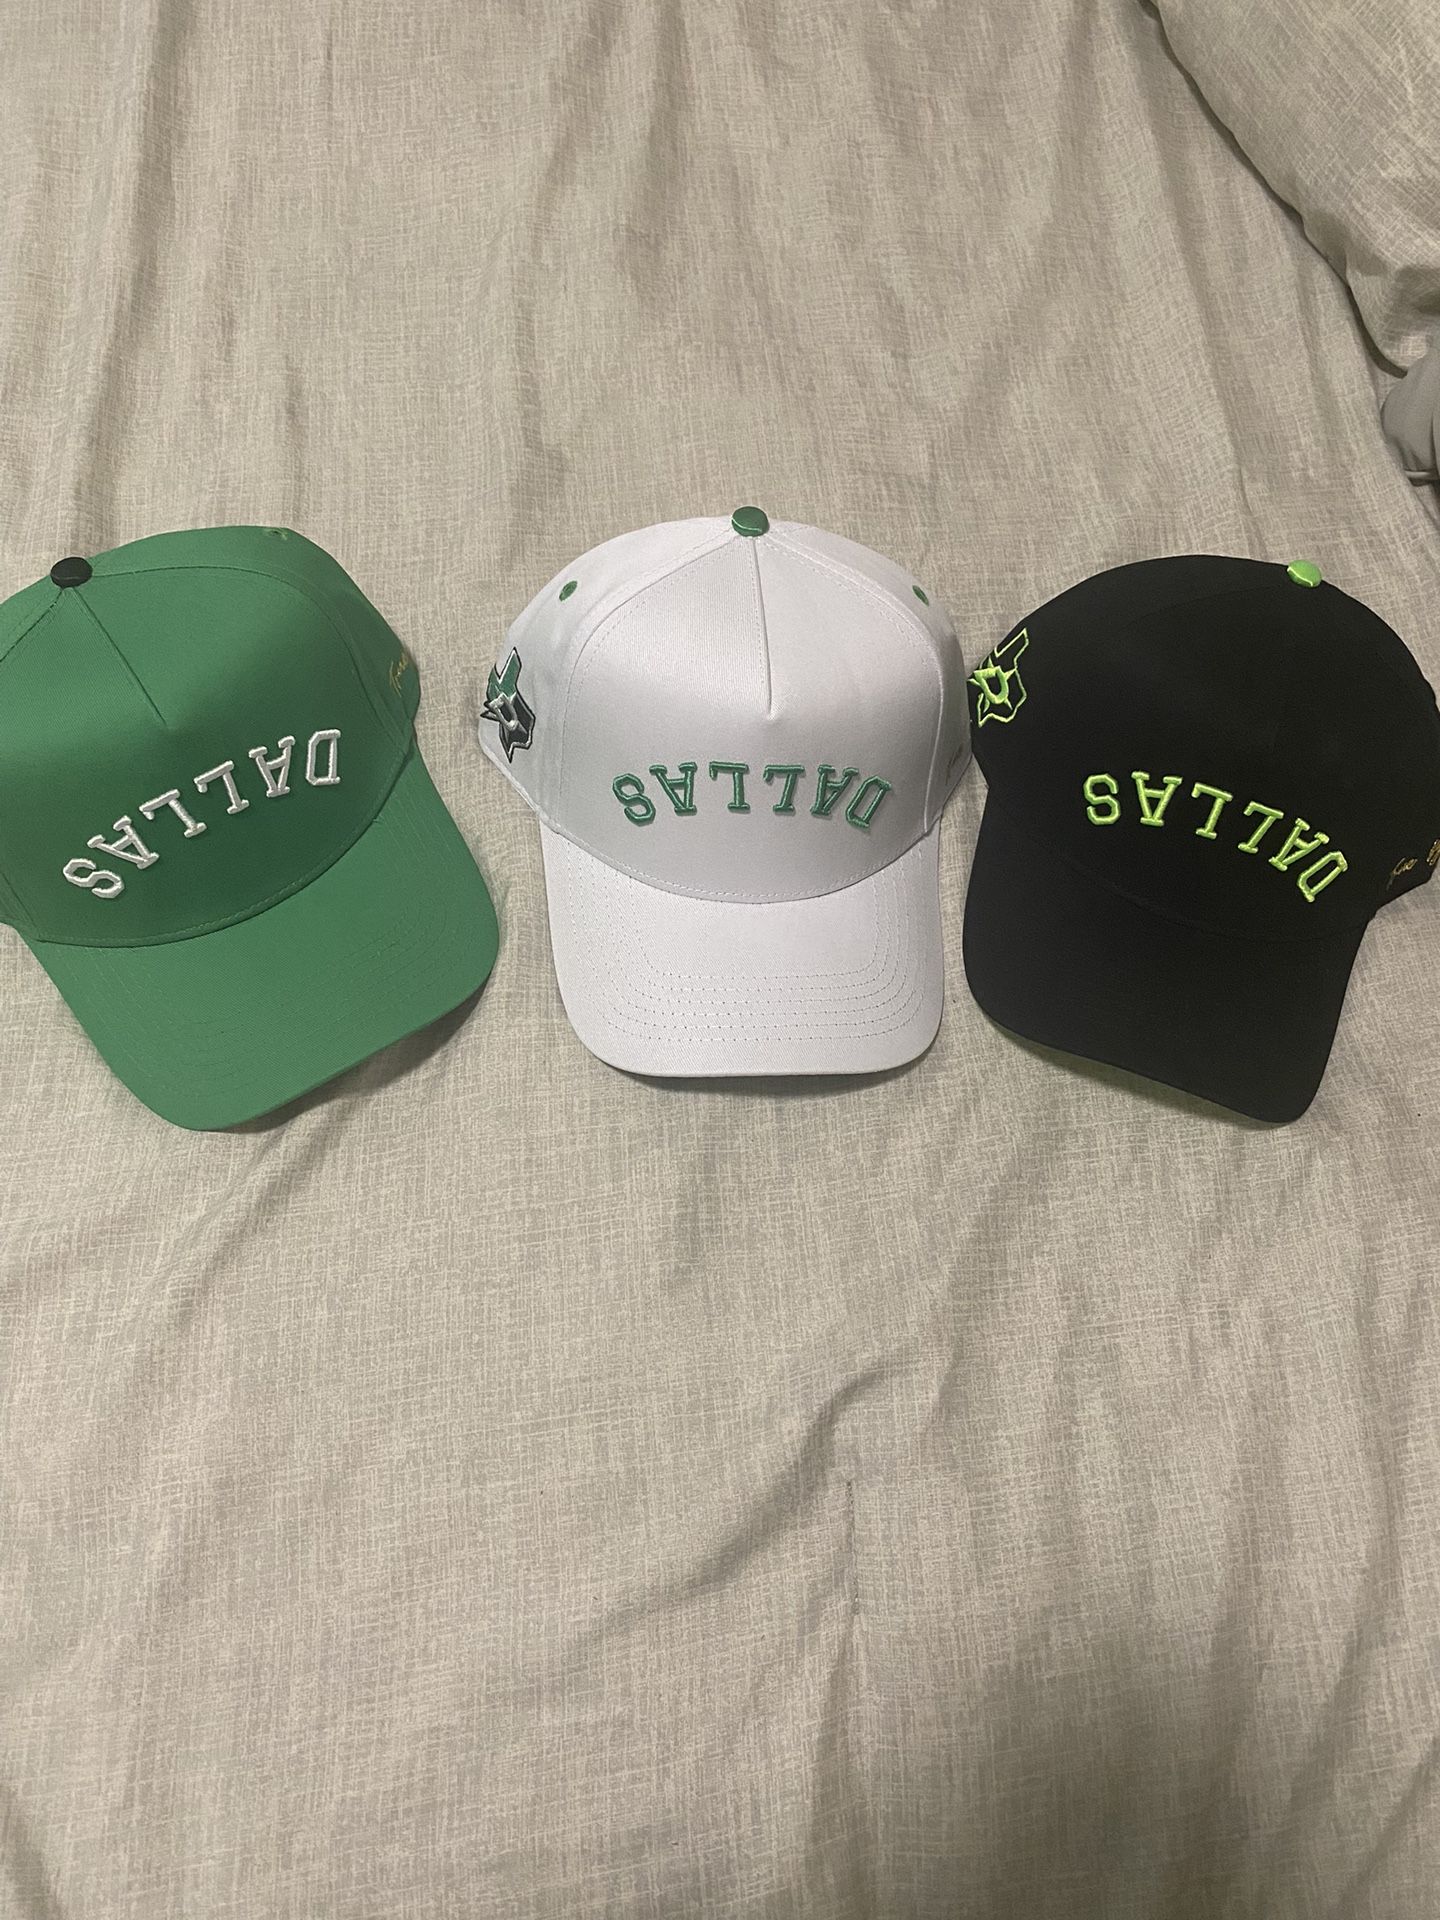 True BRVND Dallas Stars Edition Hats for Sale in Duncanville, TX